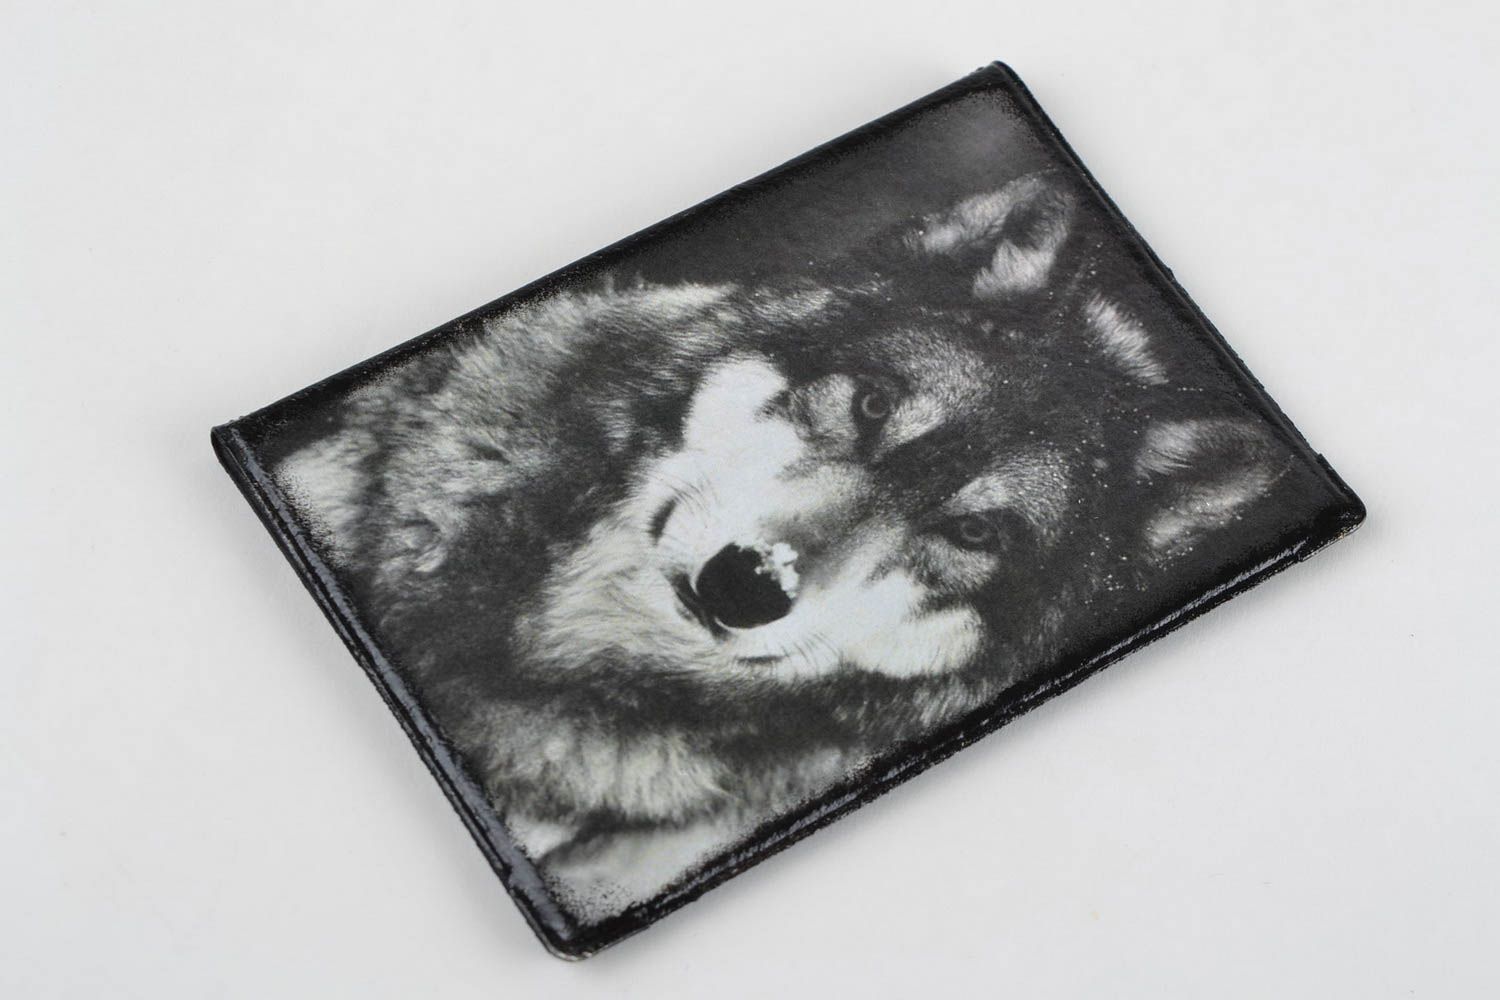 Handmade stylish faux leather passport cover with decoupage image of gray wolf photo 3